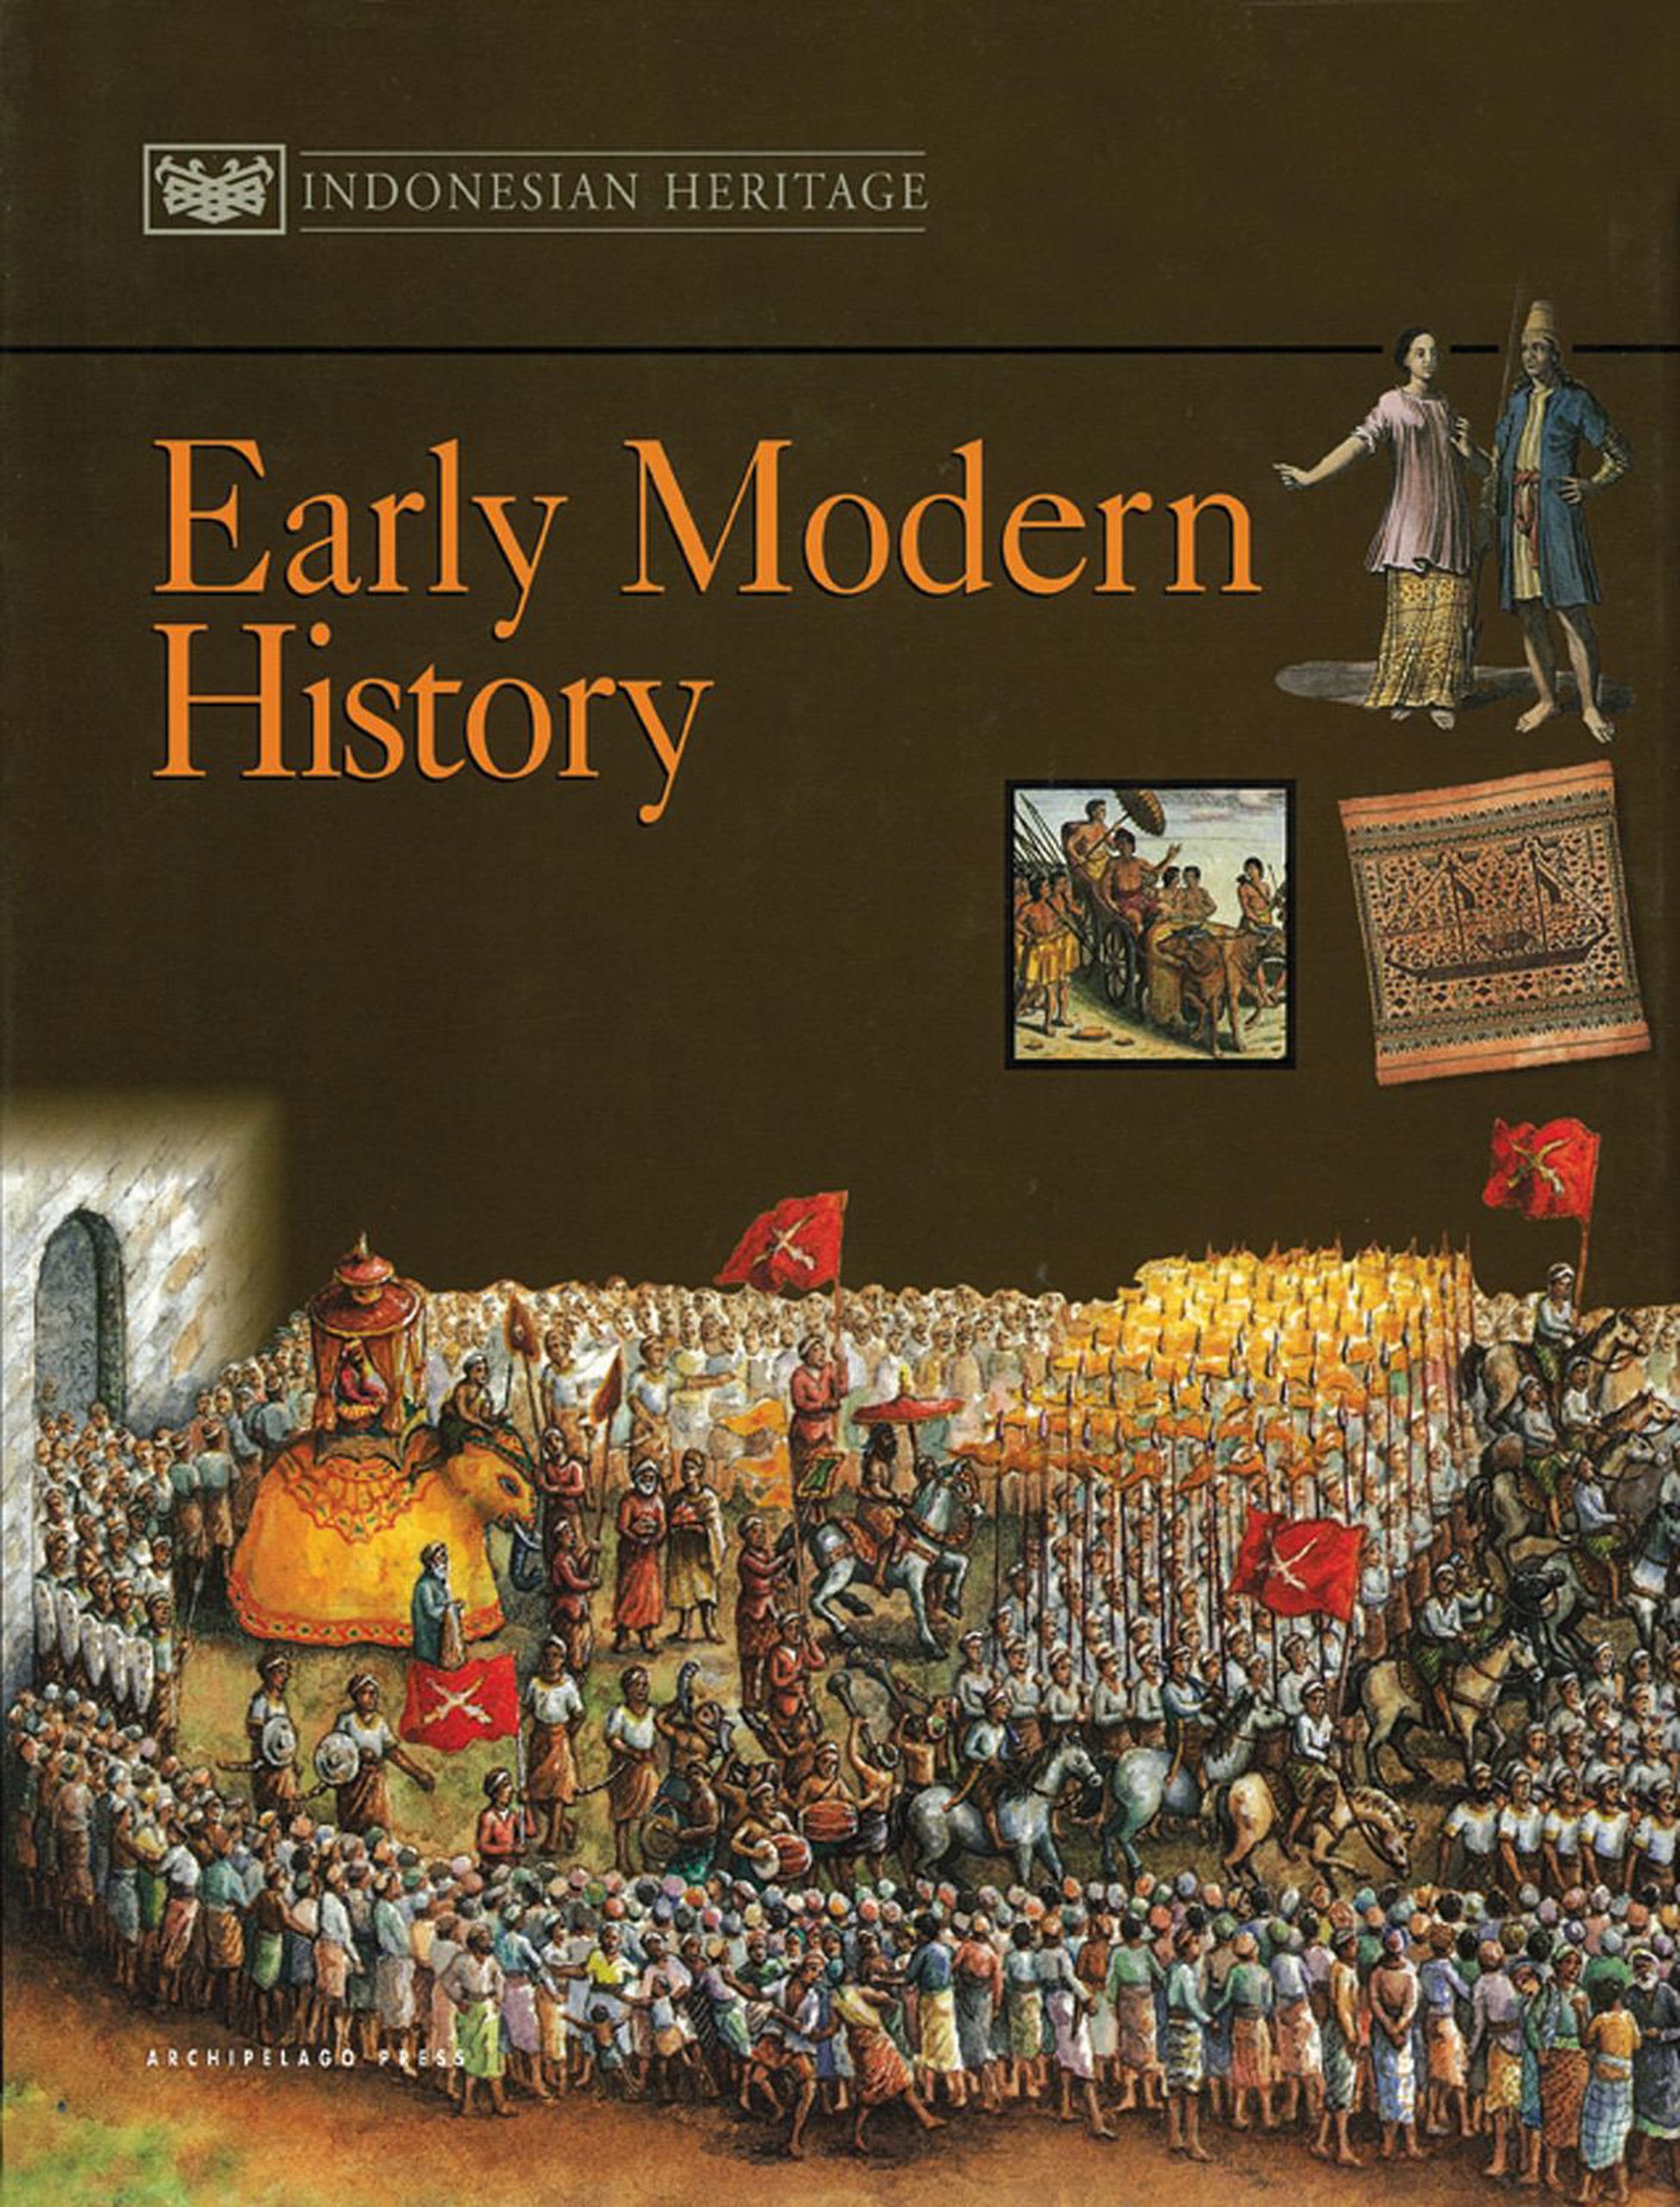 INDONESIAN heritage 3 : early modern history